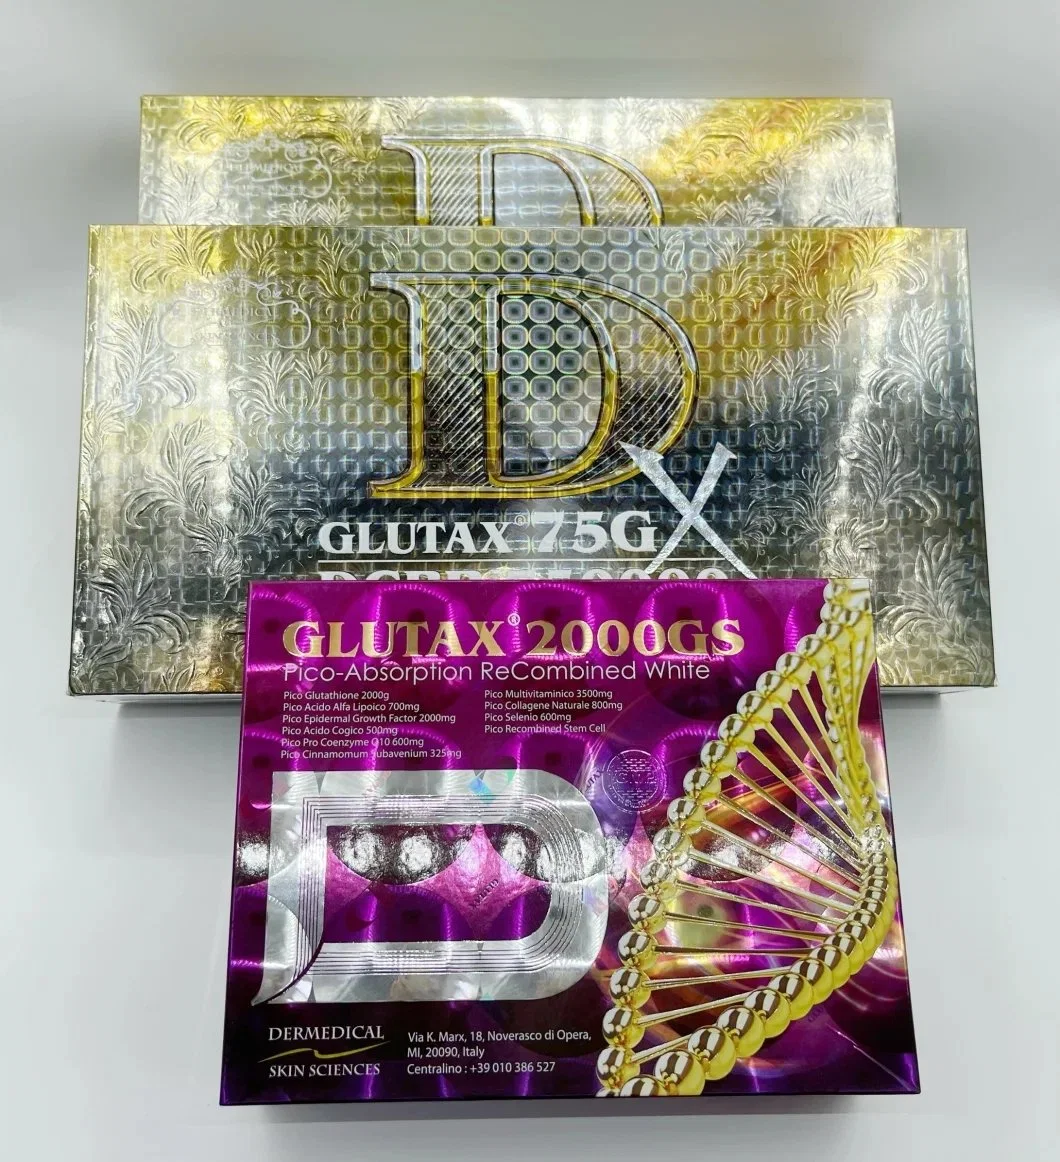 New Improved Glutax 2000000gx 180W Whitening Products Injection Replacing Glutax 2000GS